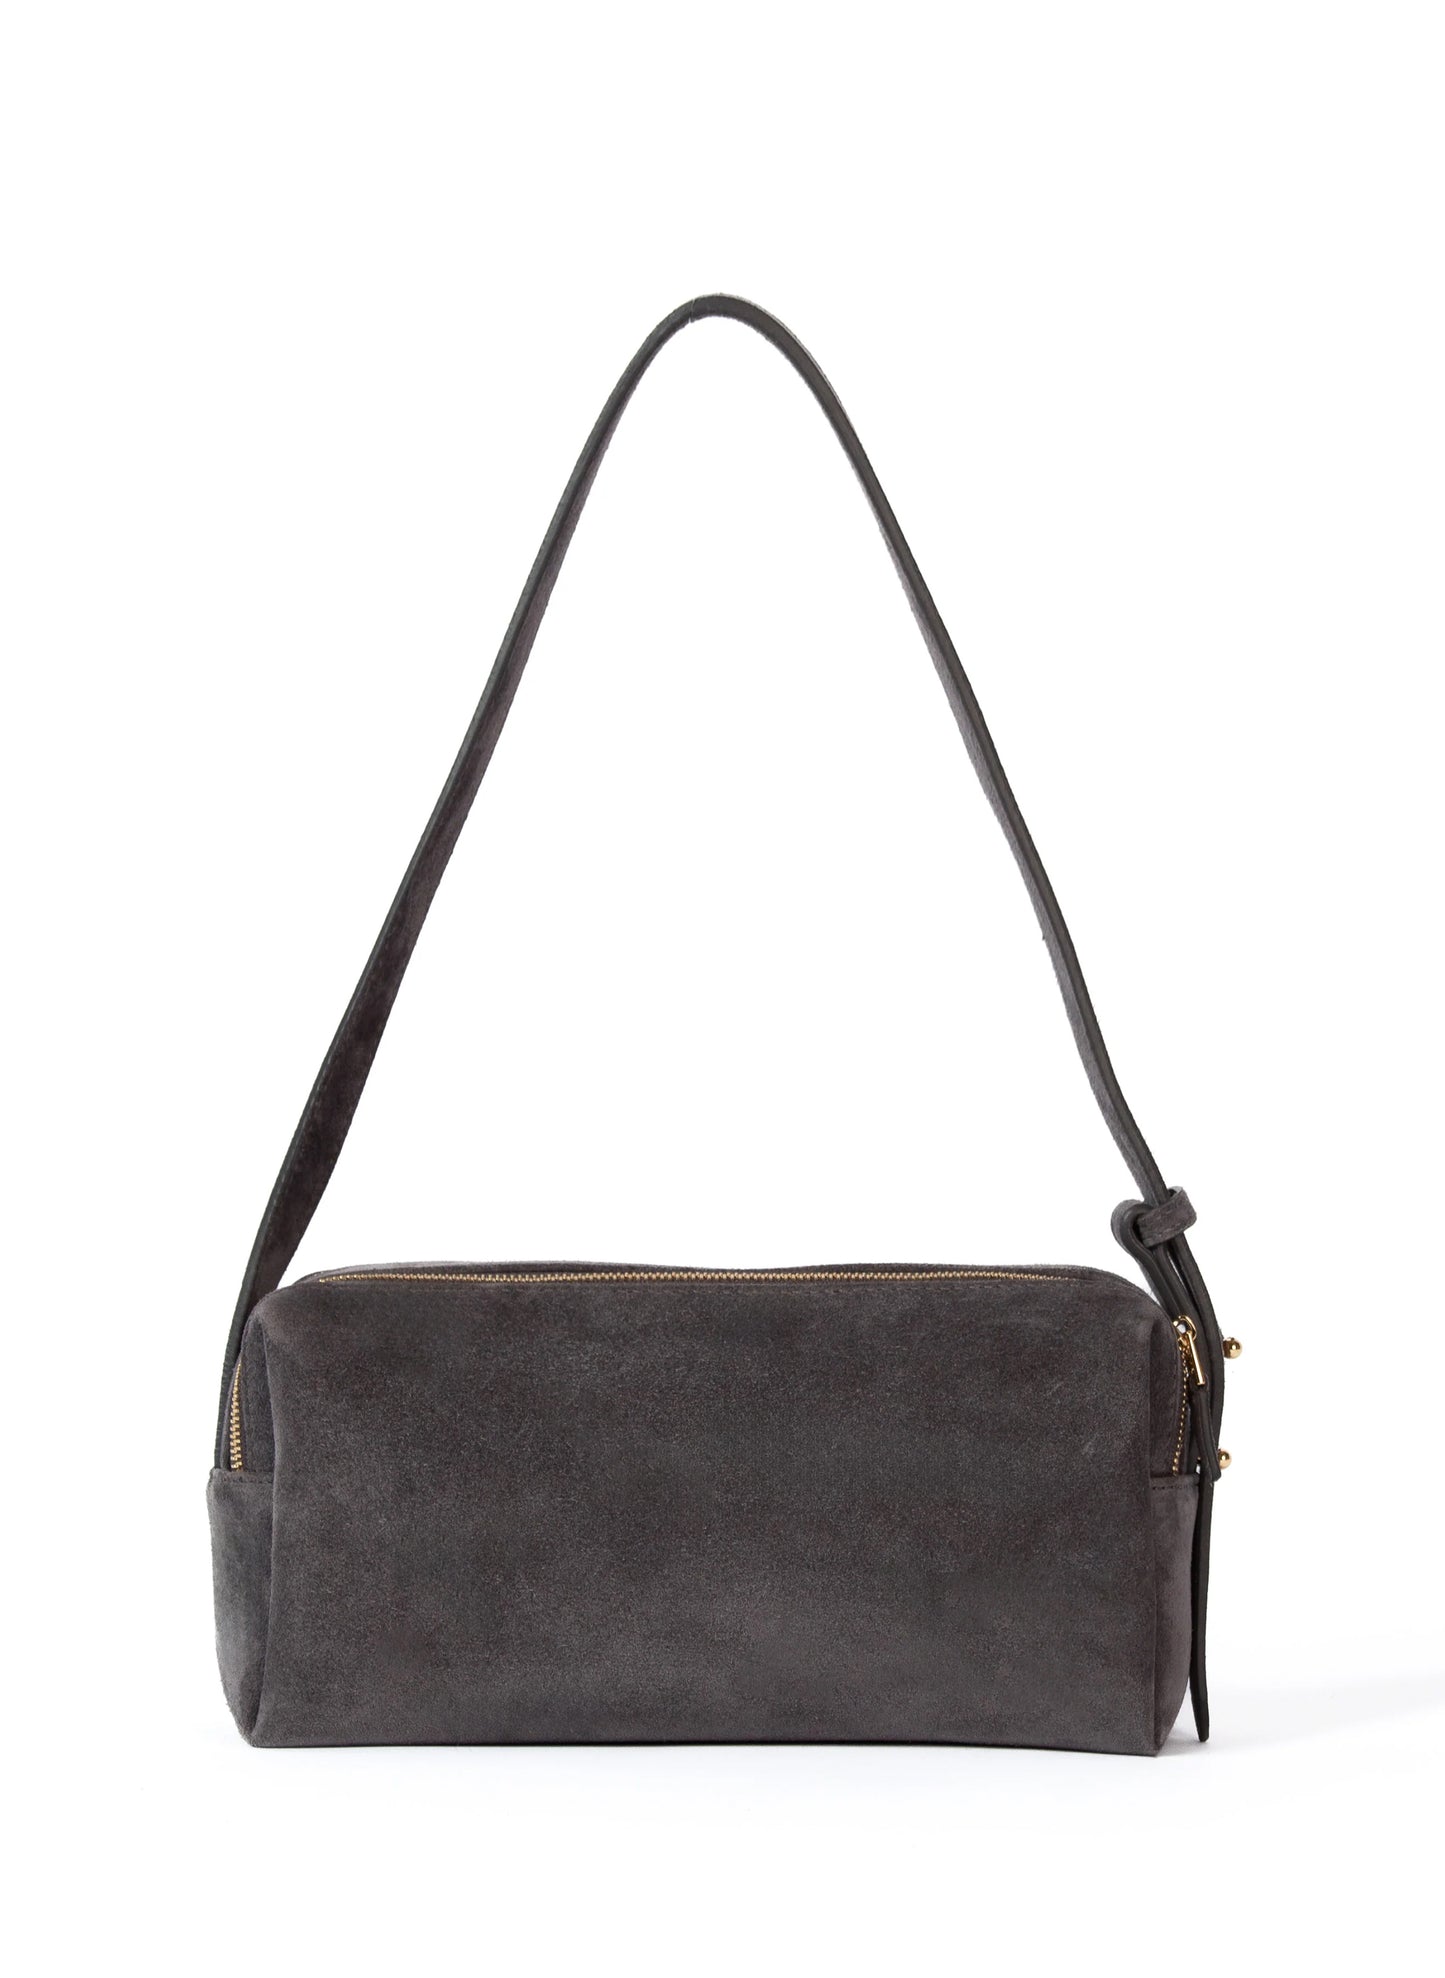 Trousse Suede Grey